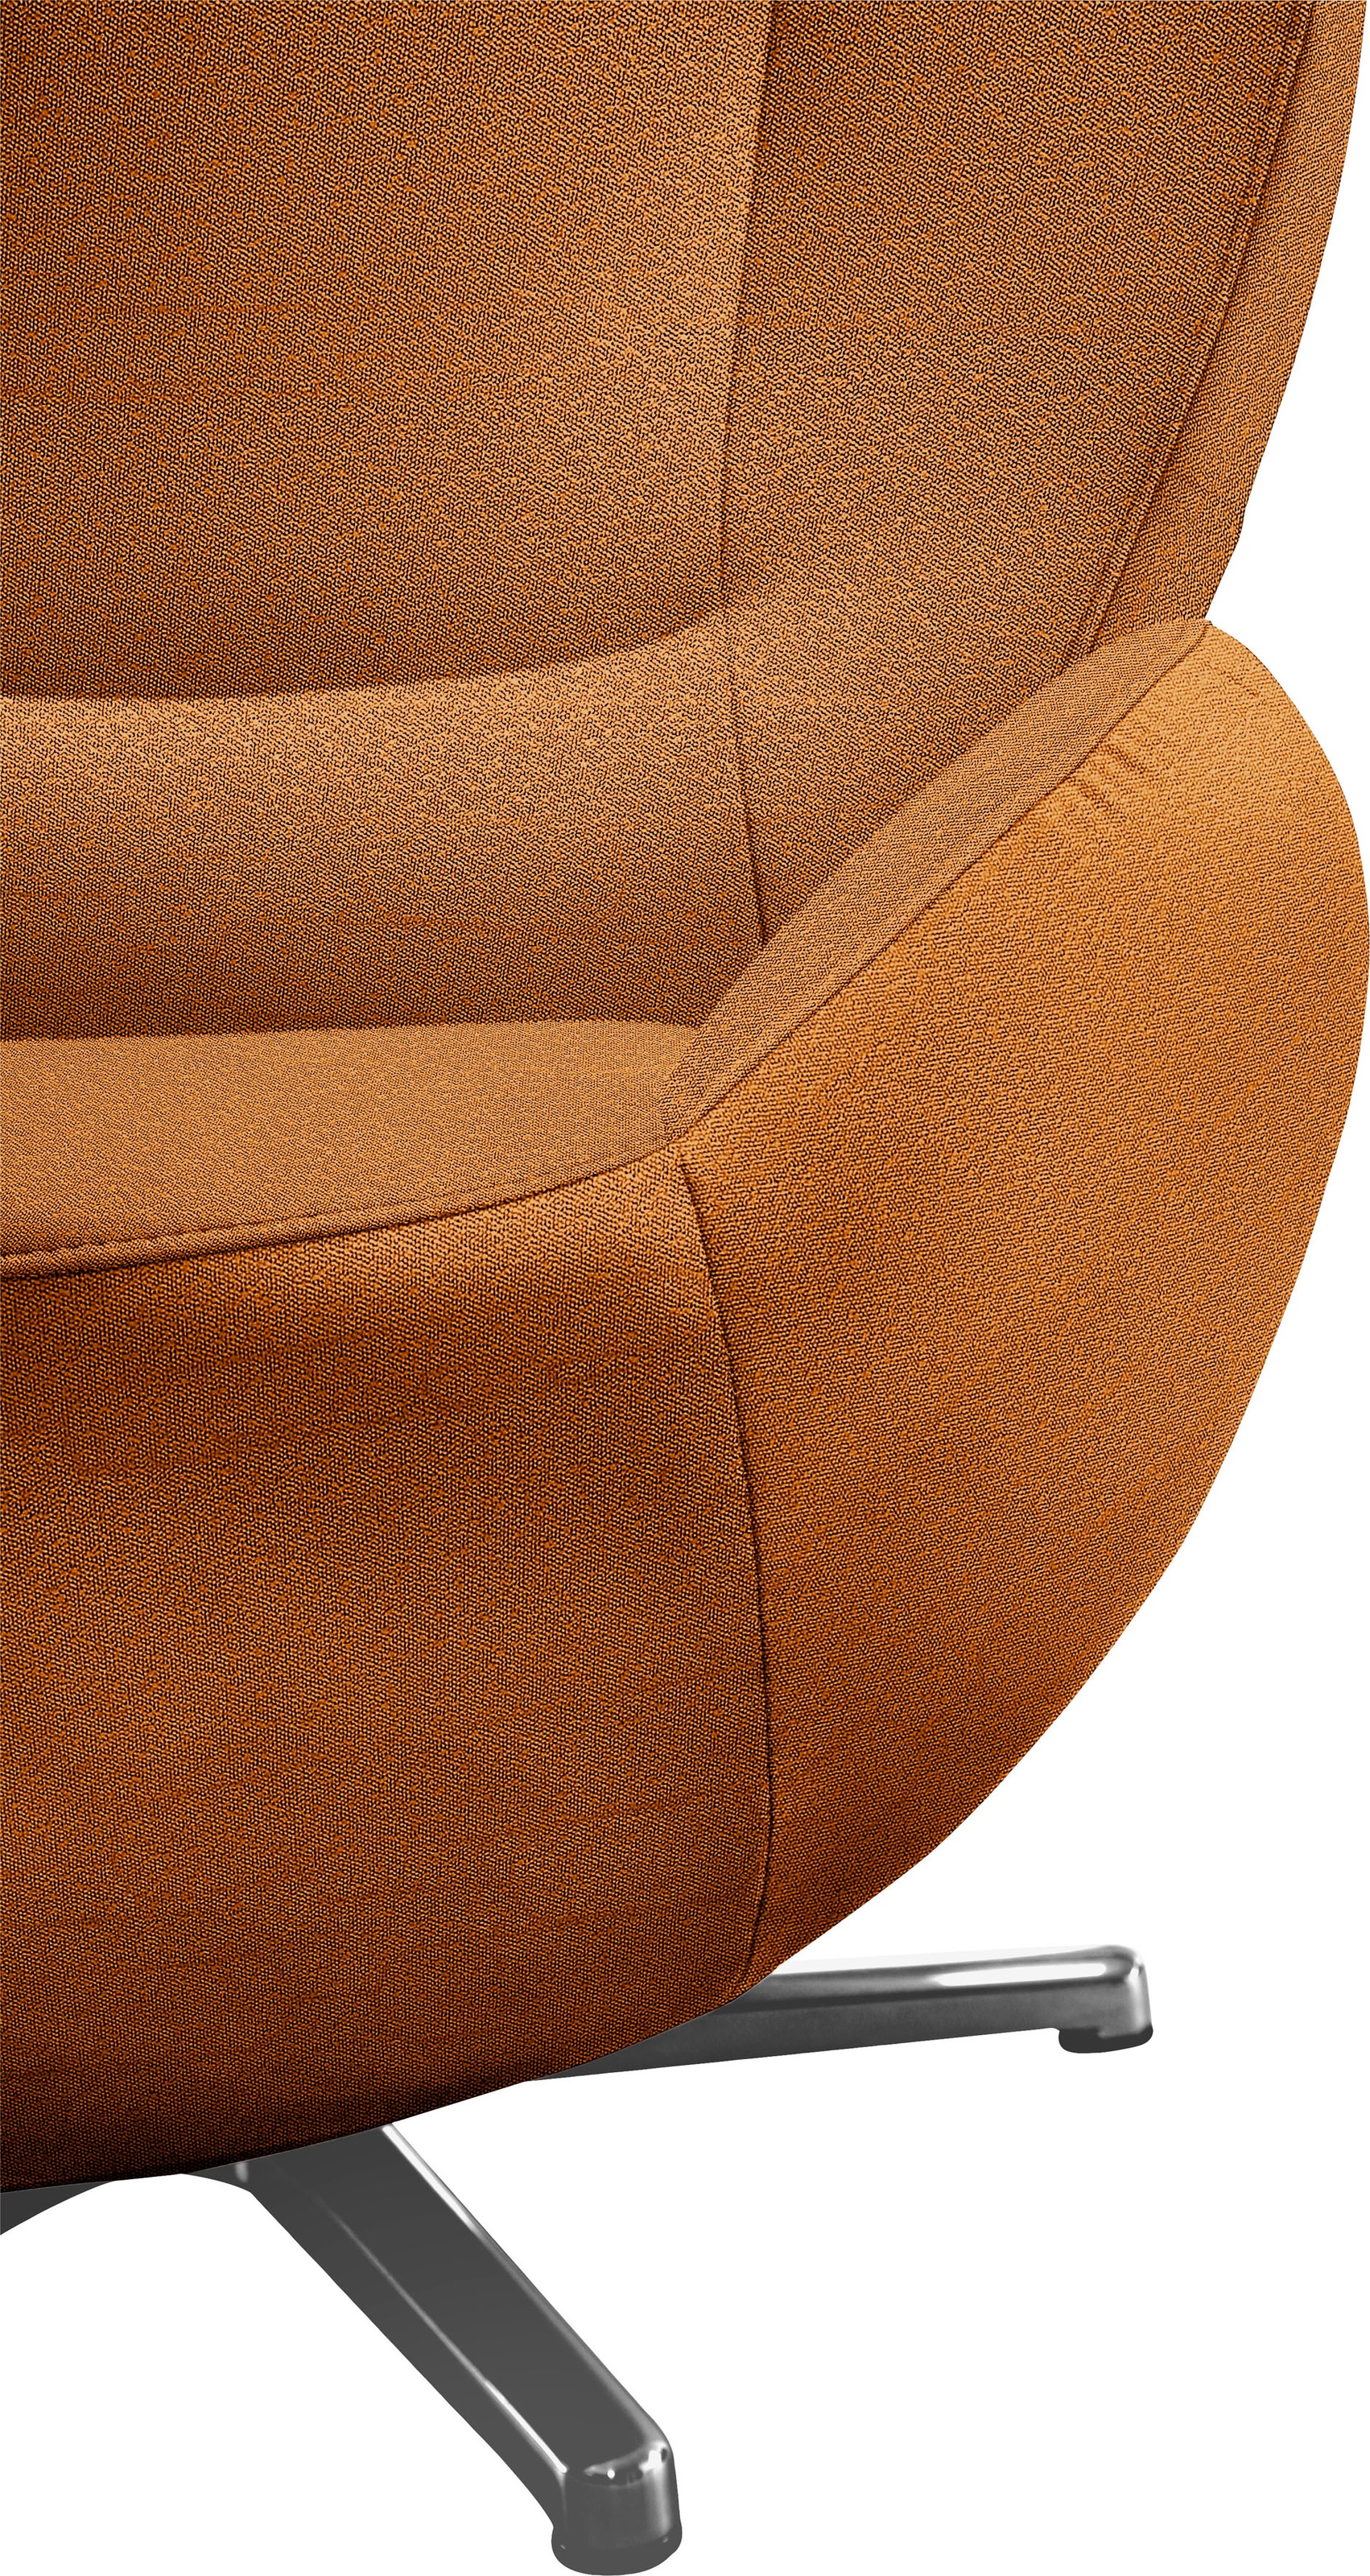 TOM TAILOR in »TOM PURE«, Metall-Drehfuß BAUR HOME Loungesessel | Chrom mit